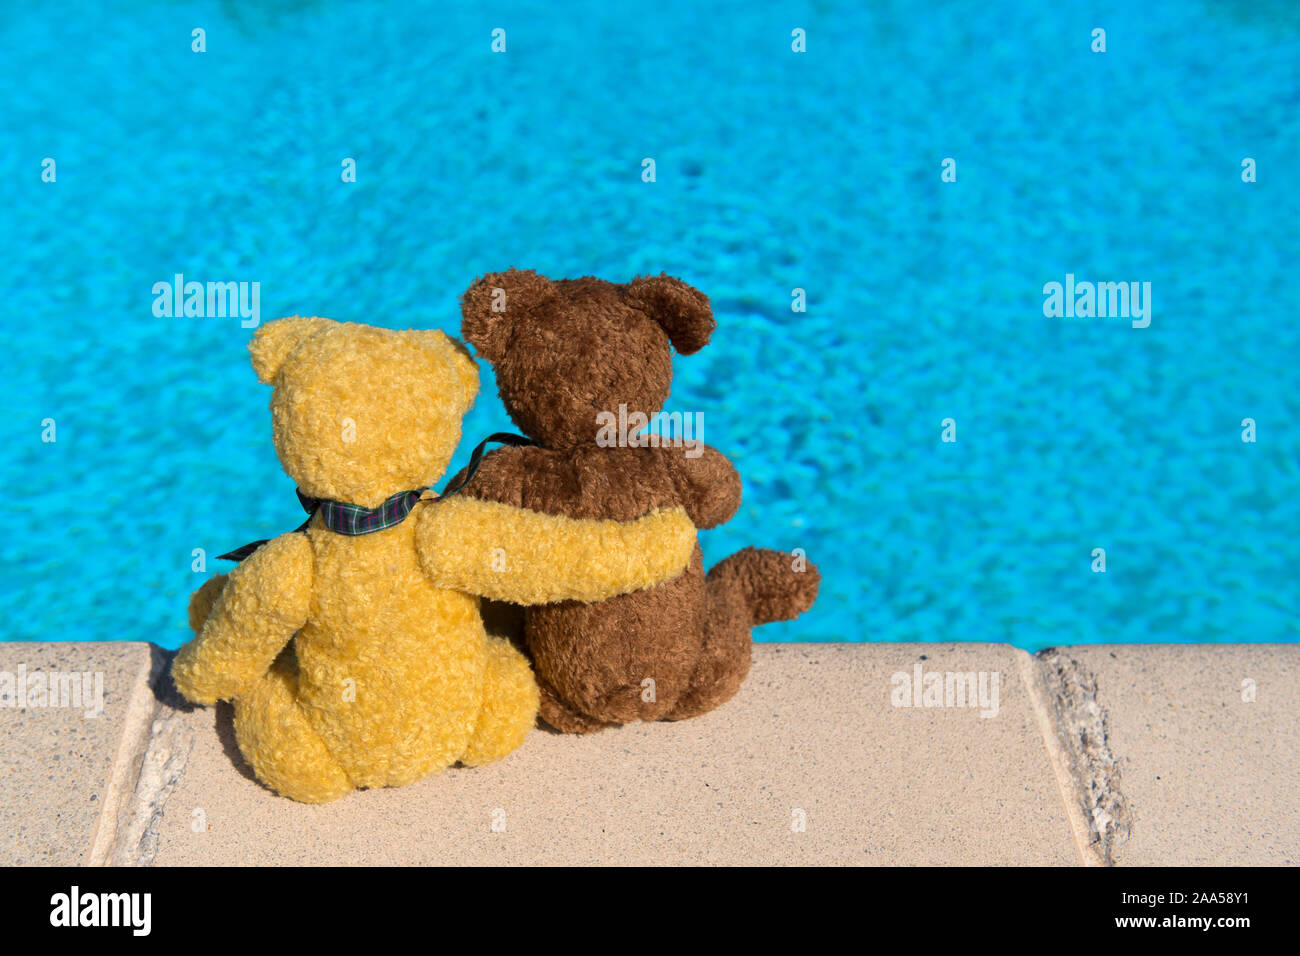 Two bears on vacation near swimming pool Stock Photo